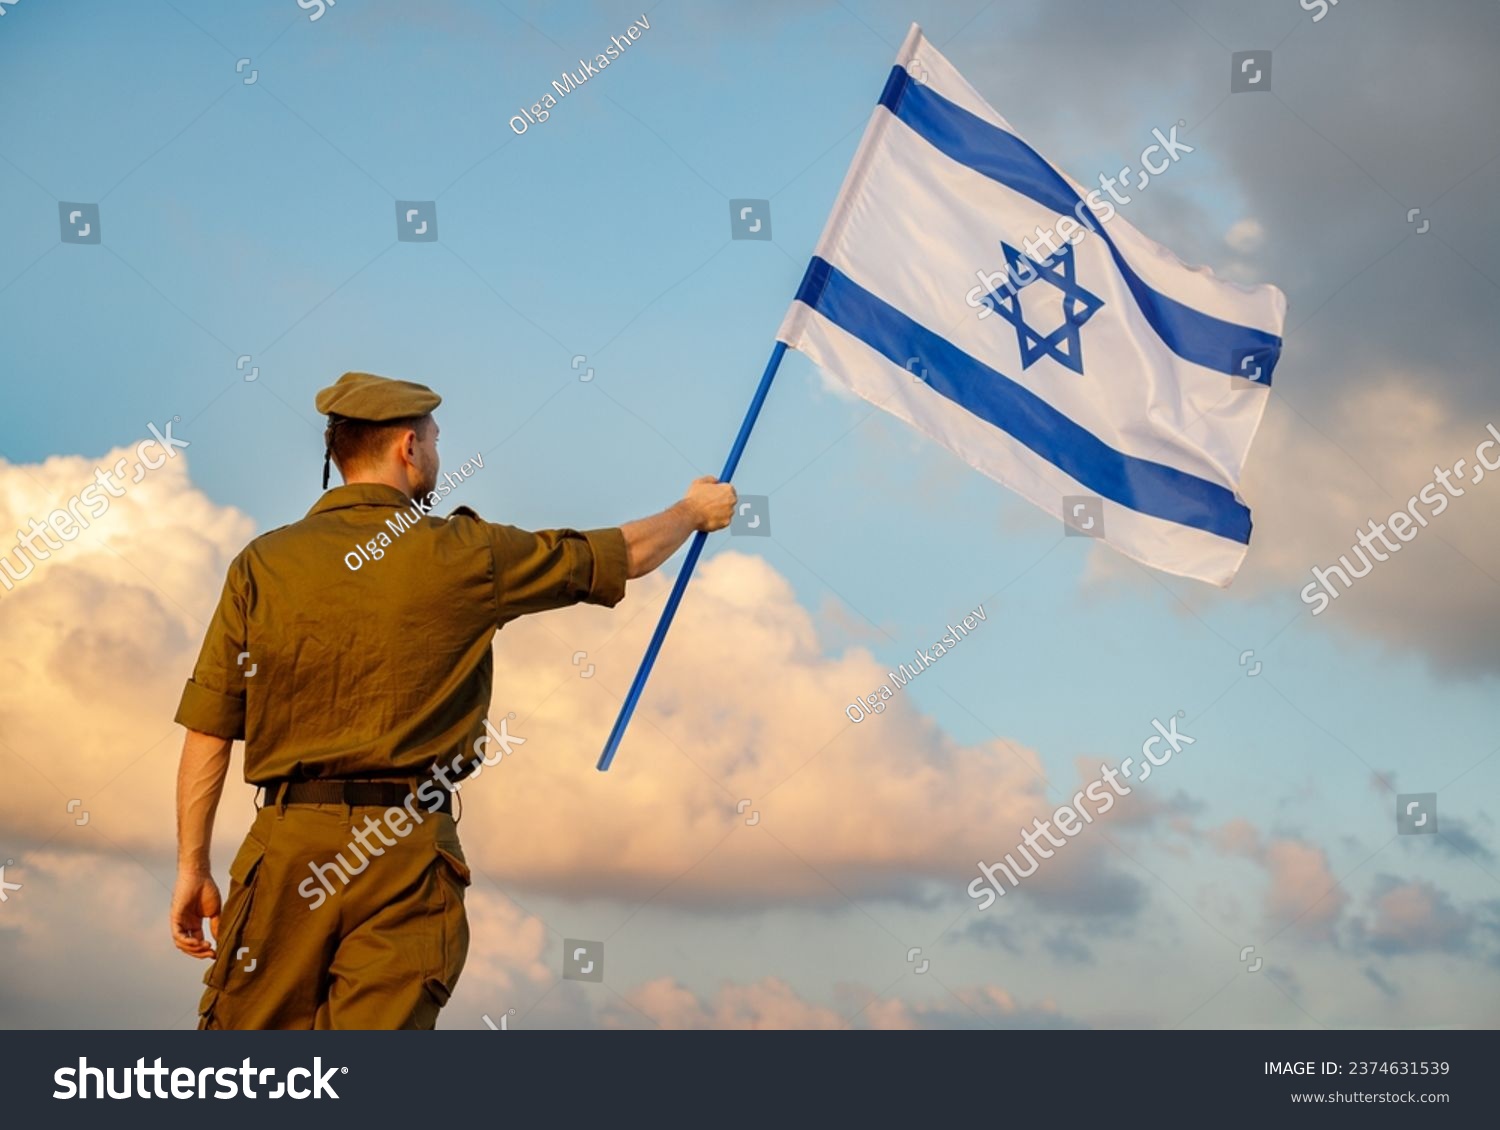 A guy in a soldier's uniform with an Israeli flag in his hand against a cloudy sky. Remembrance Day - Yom HaZikaron, Patriotic holiday, Israeli Independence Day - Yom Ha'atzmaut concept. #2374631539